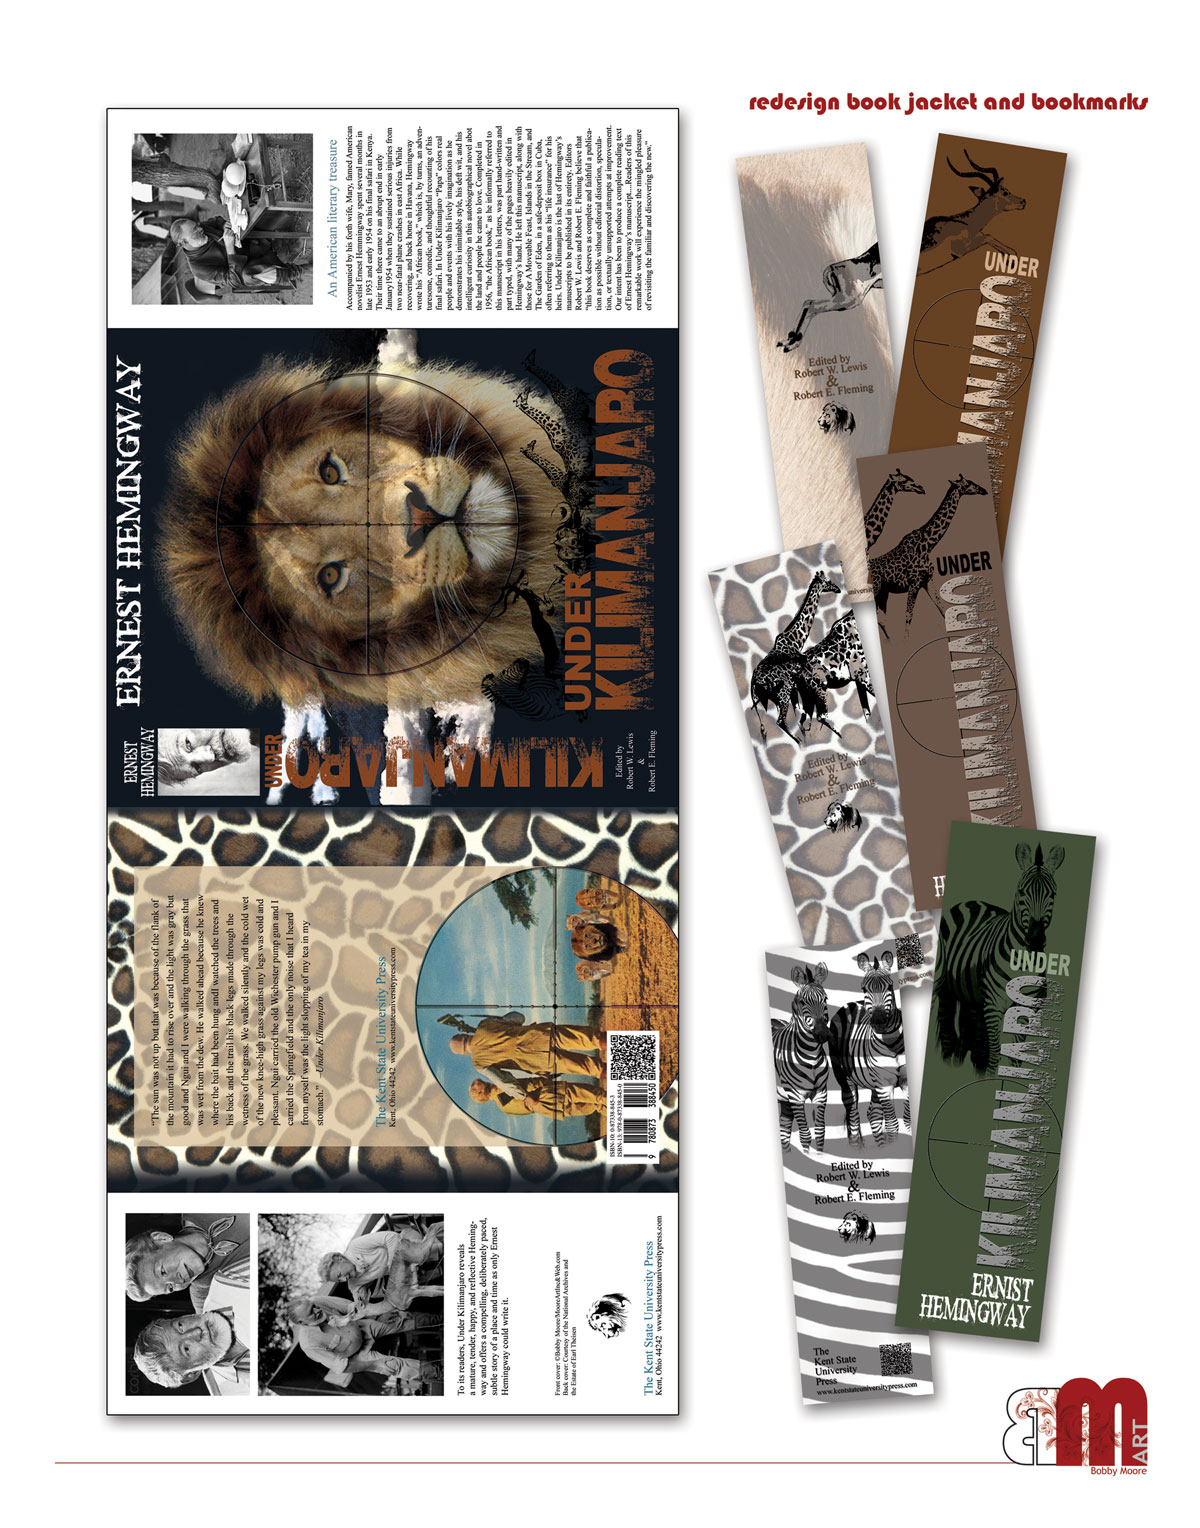 Sample book jacket re-do with bookmarks